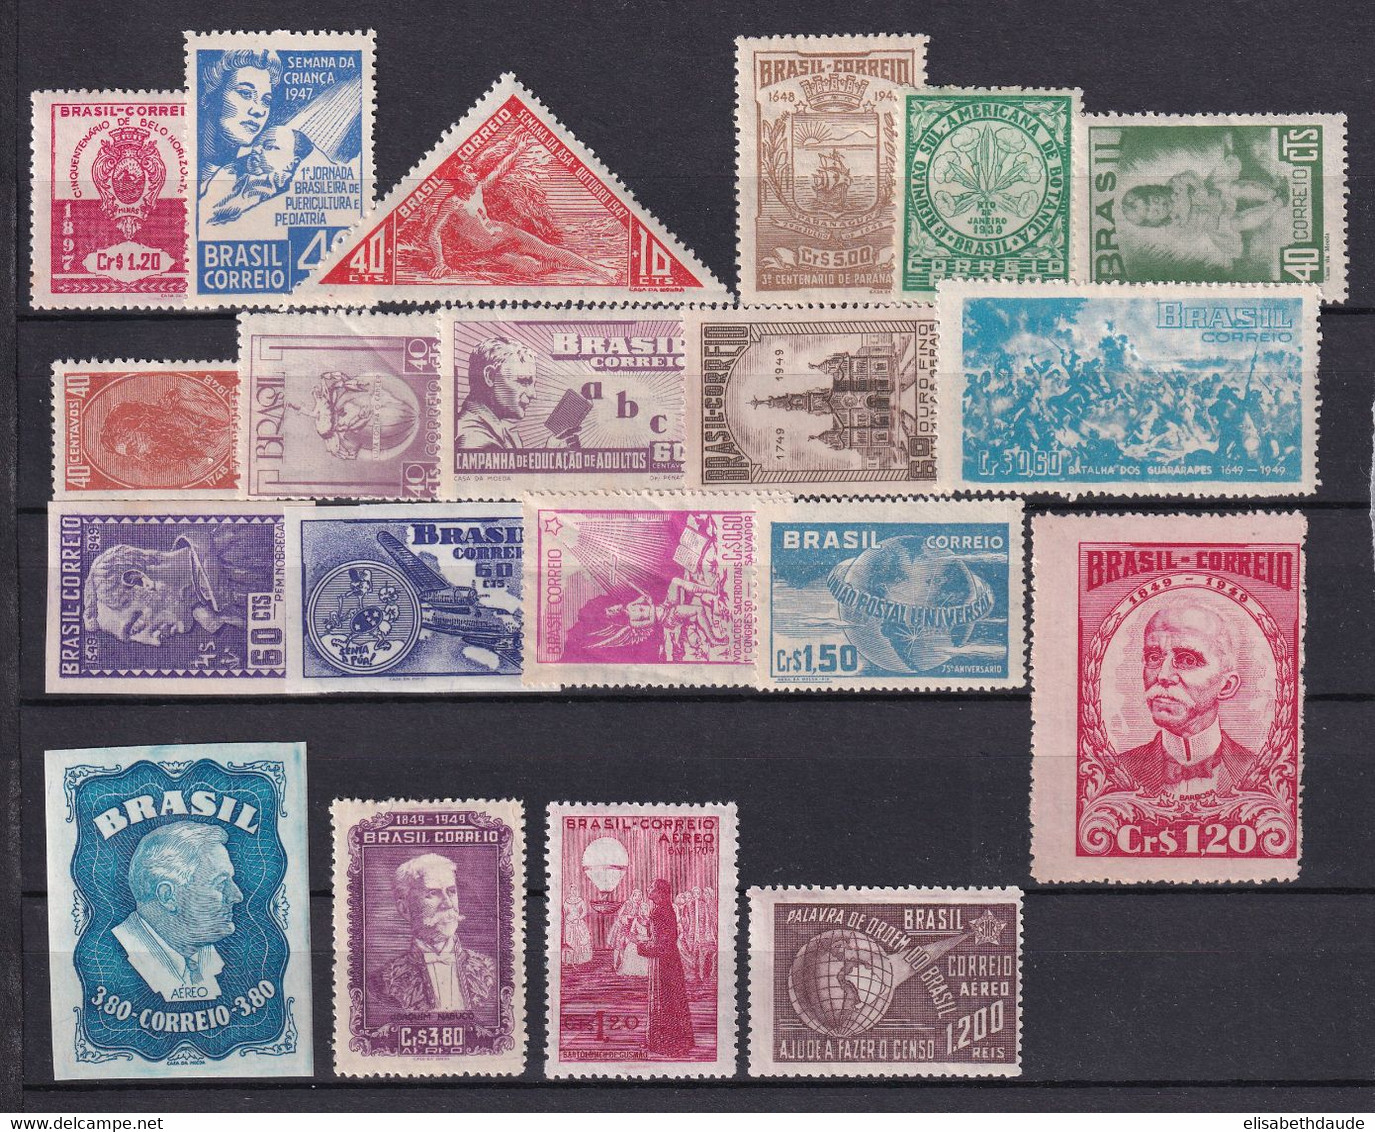 BRESIL - 1933/1949 - COLLECTION UNIQUEMENT ** MNH ! - COTE YVERT = 130++ EUR. - 2 PAGES ! - Unused Stamps